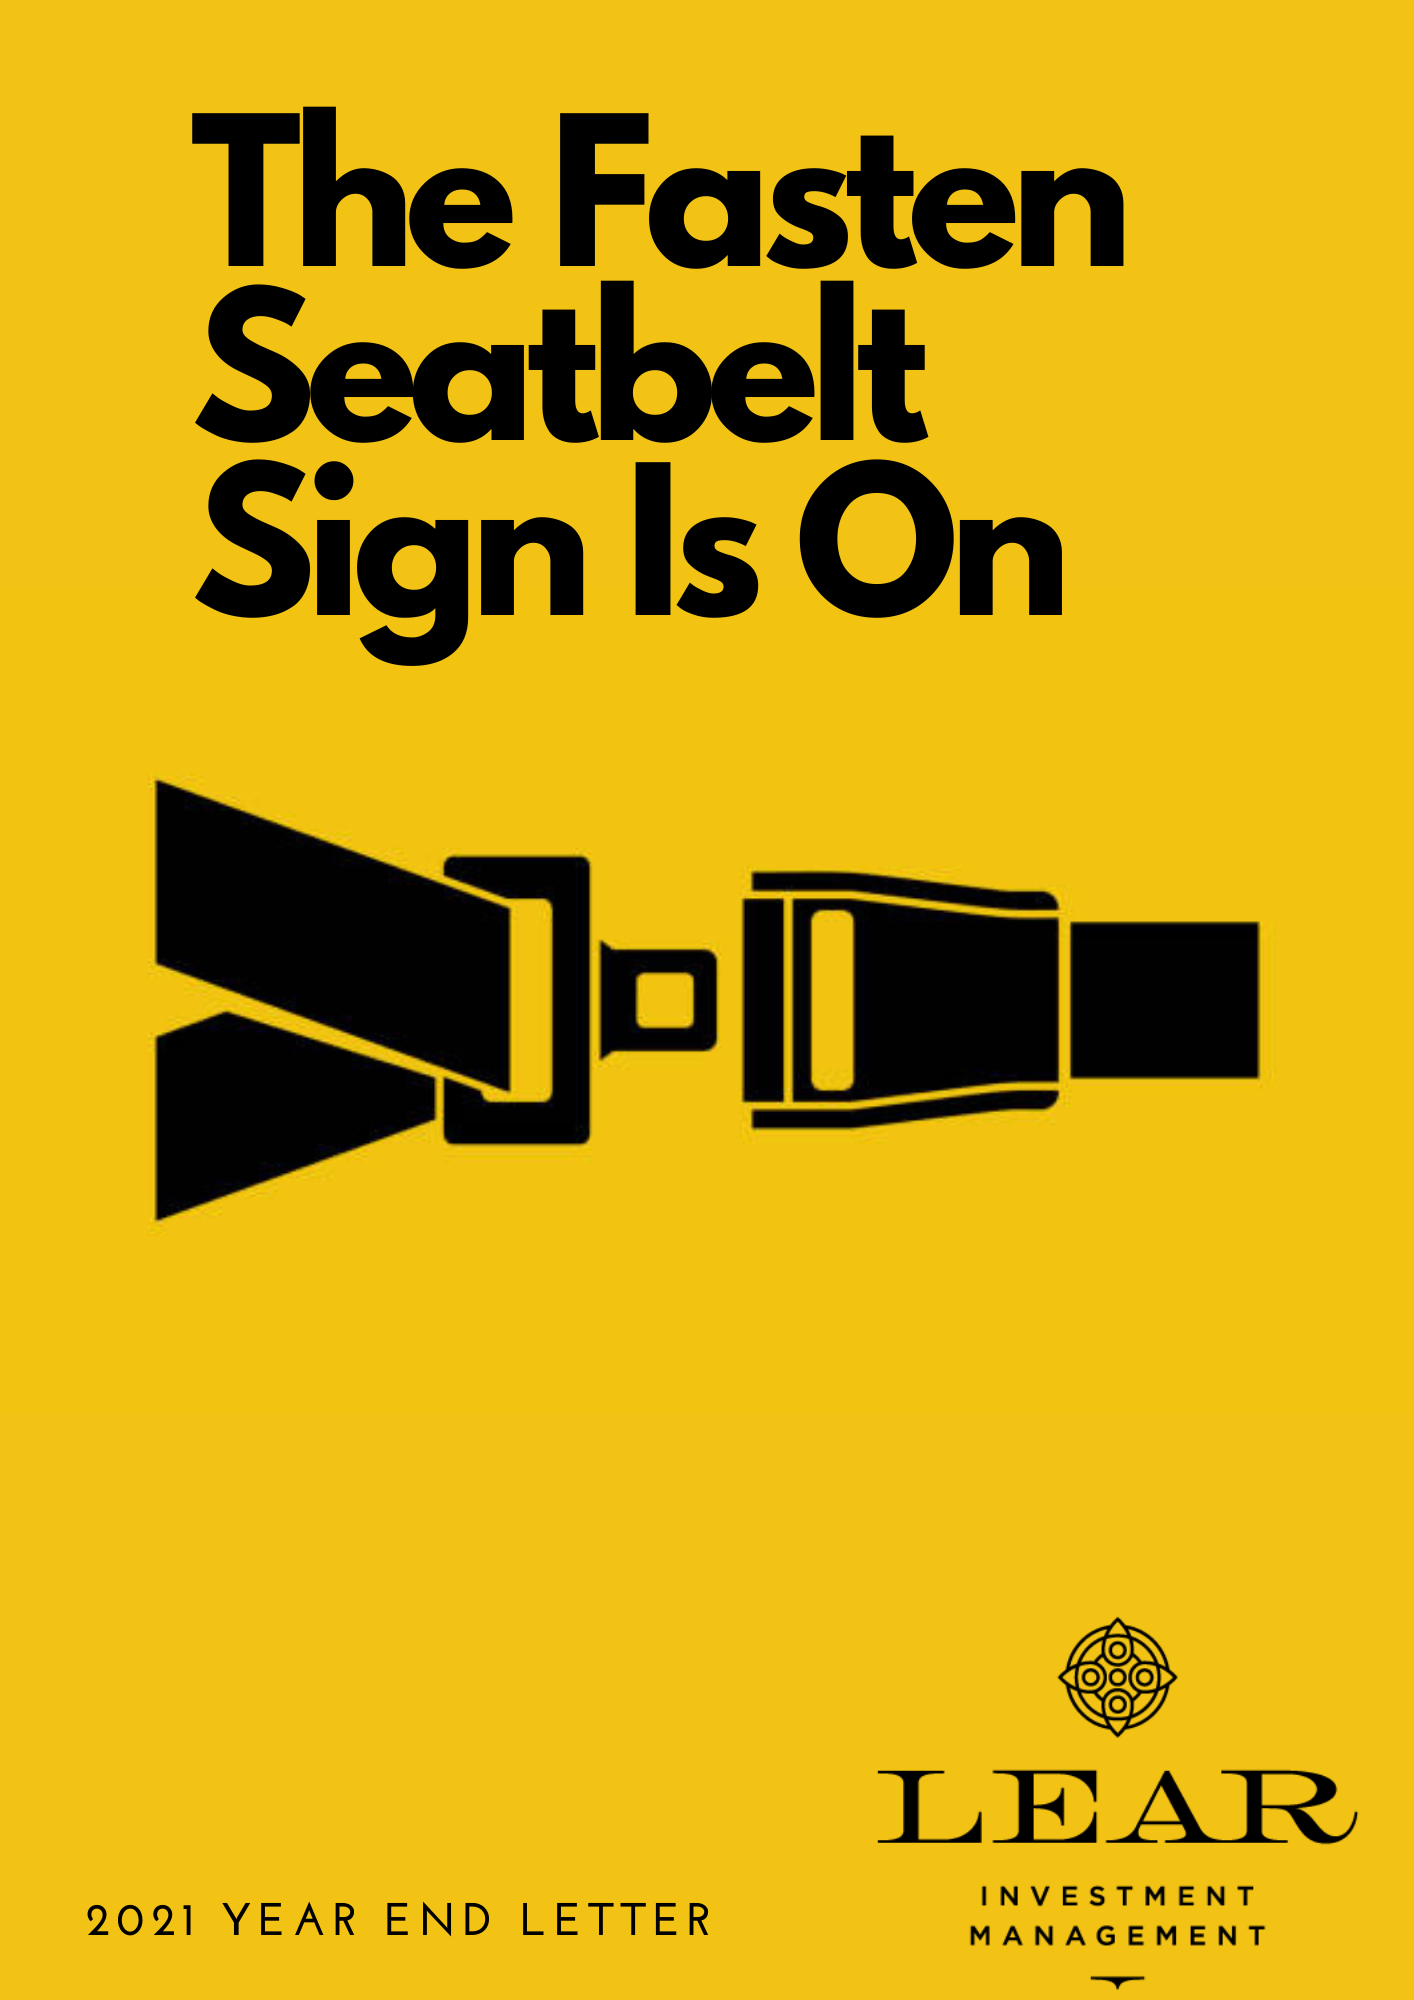 The Fasten Seatbelt Sign is On